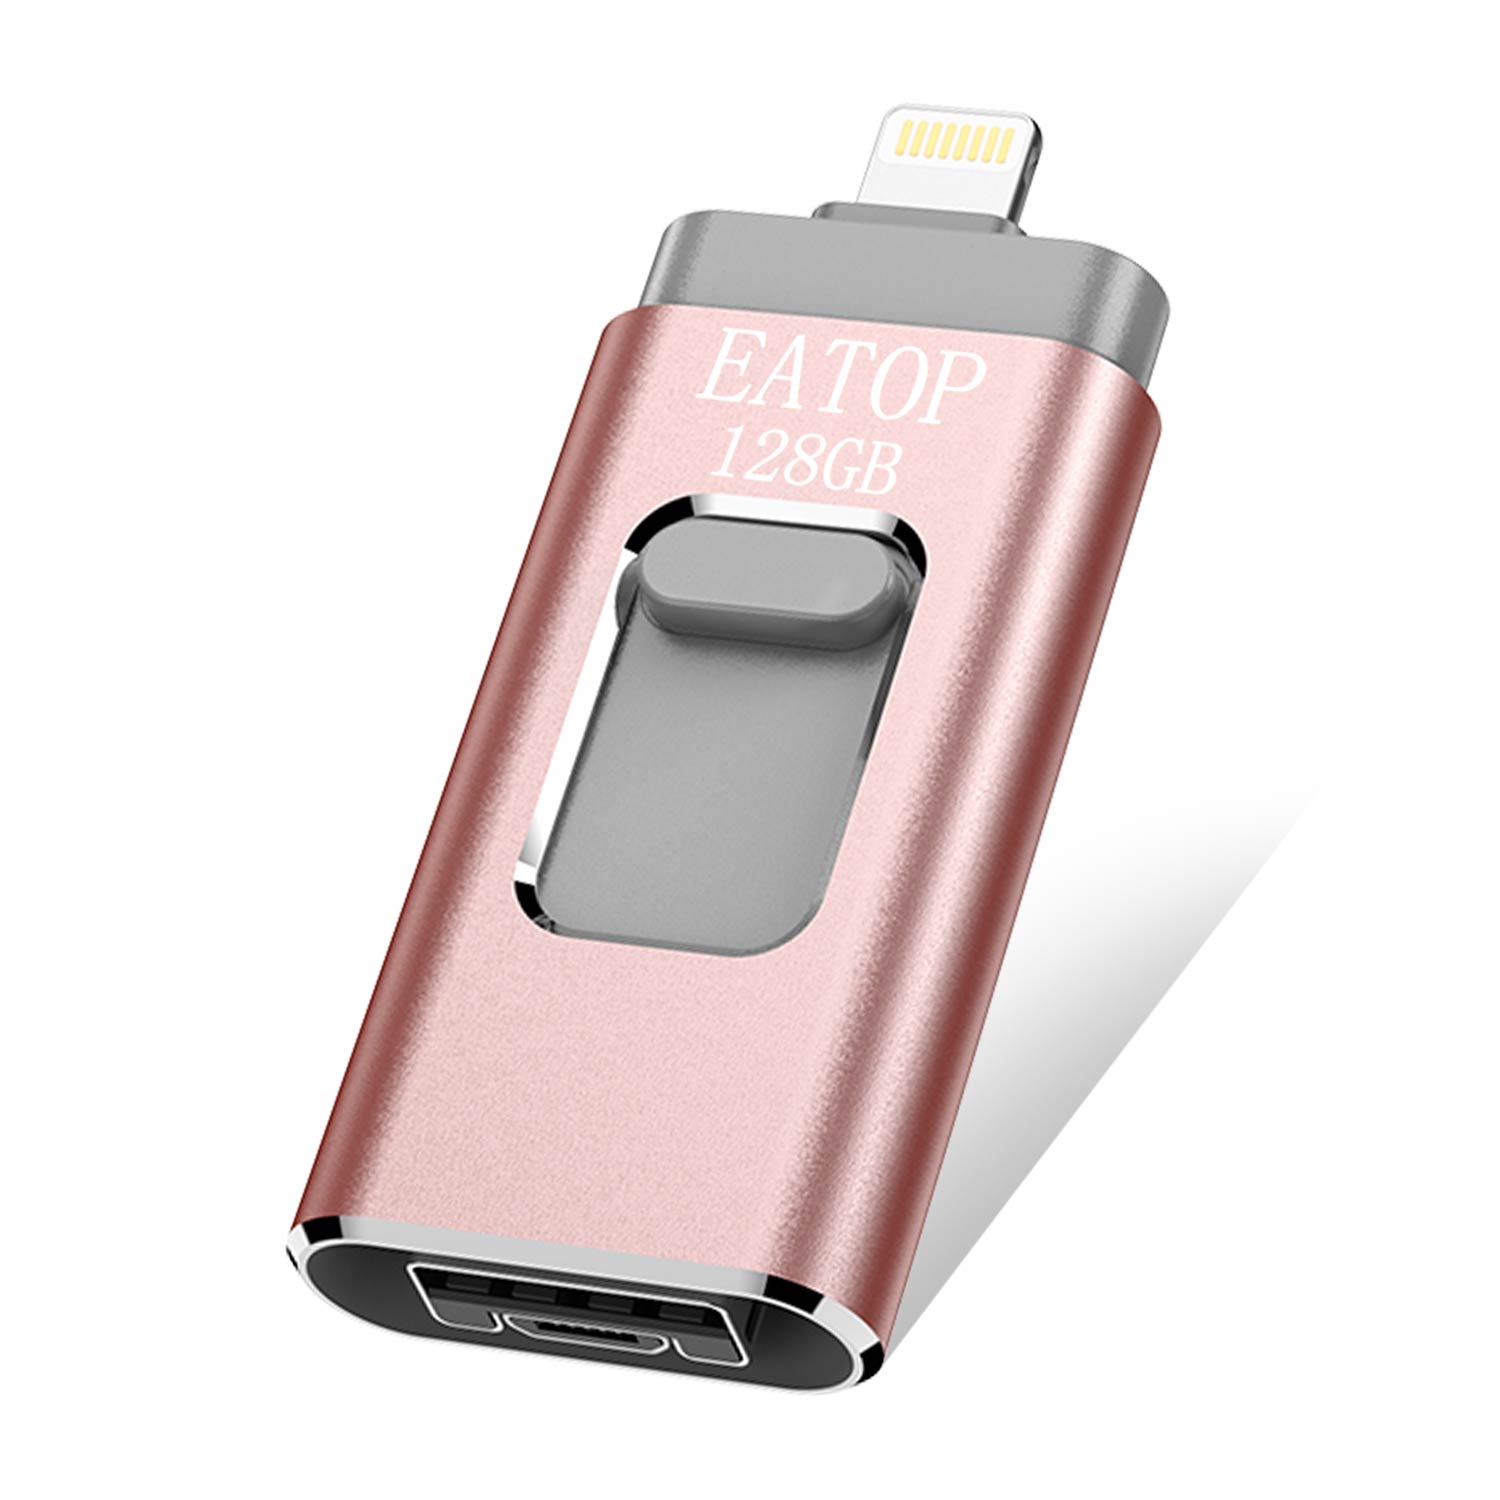 USB Flash Drives 128GB iPhone Memory Stick,EATOP External Storage Memory Stick Adapter Expansion for iPod / iPhone / iPad / Android & Computers (Pink)